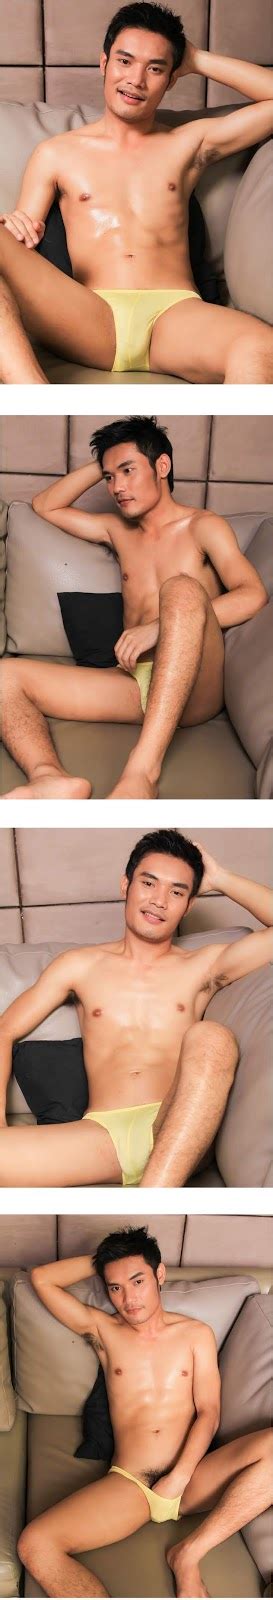 Asian Nice Guy Naked Pubic Hair From Underwear